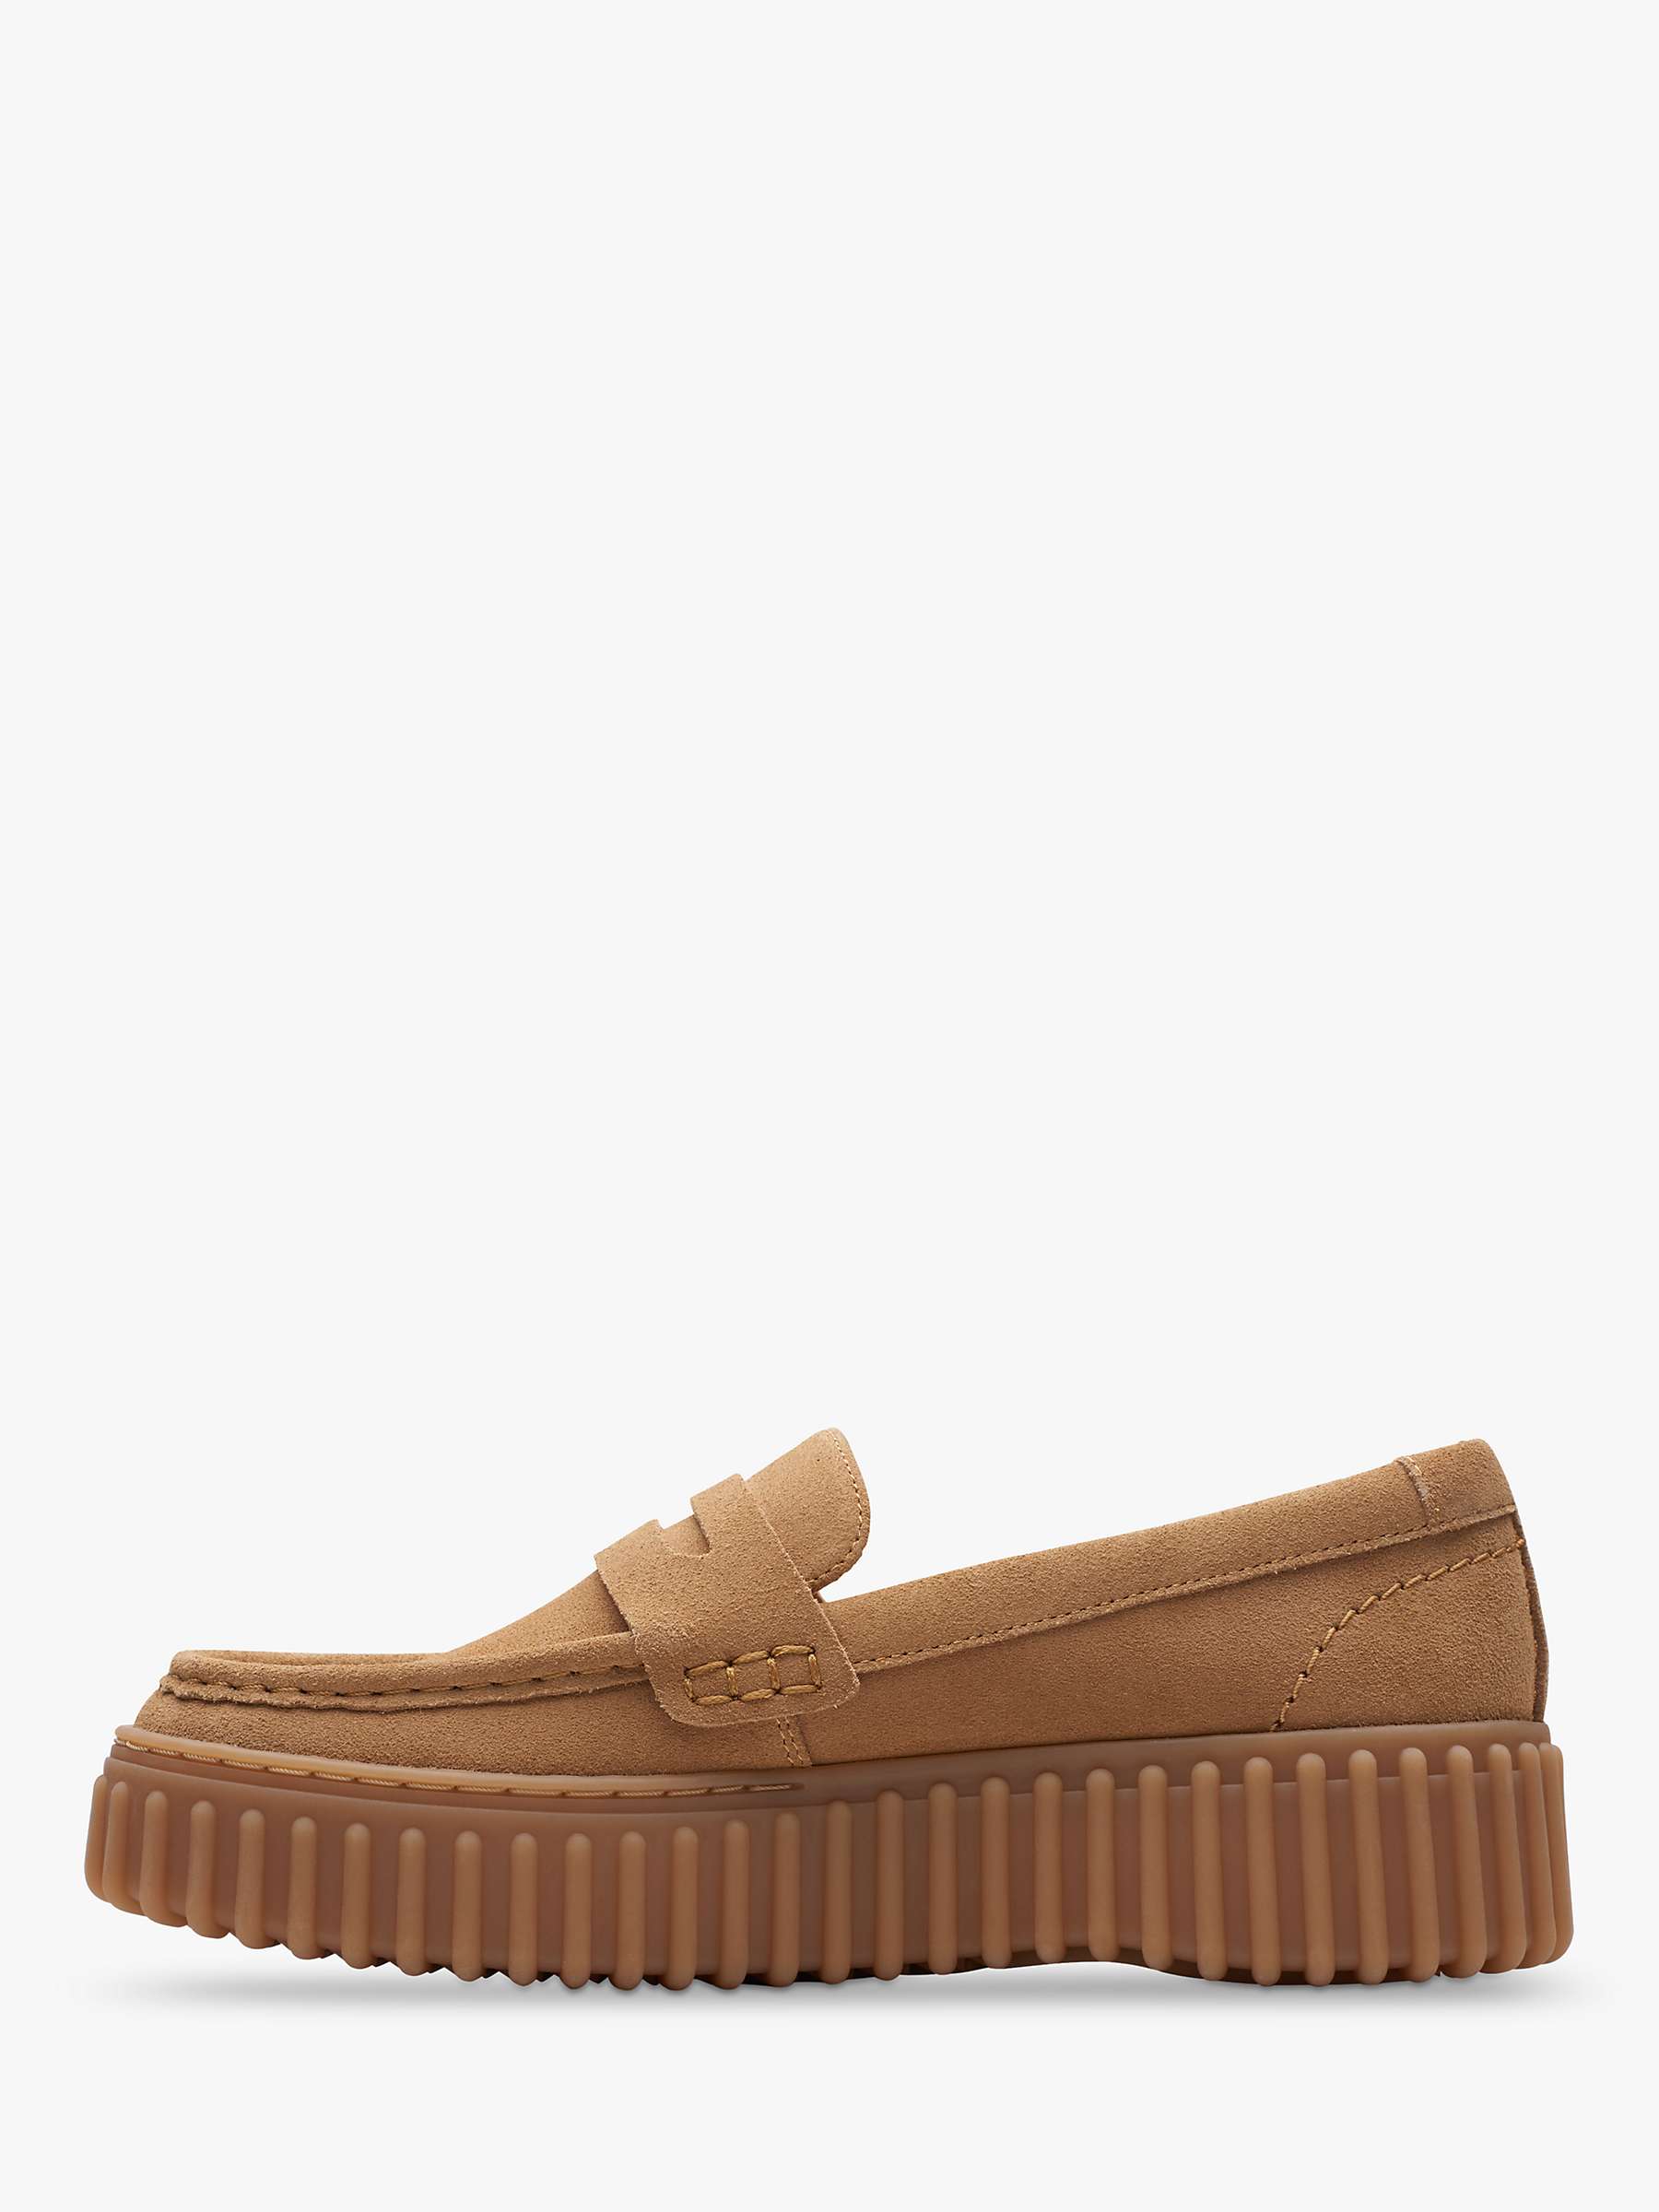 Buy Clarks Torhill Suede Penny Loafers, Light Tan Online at johnlewis.com